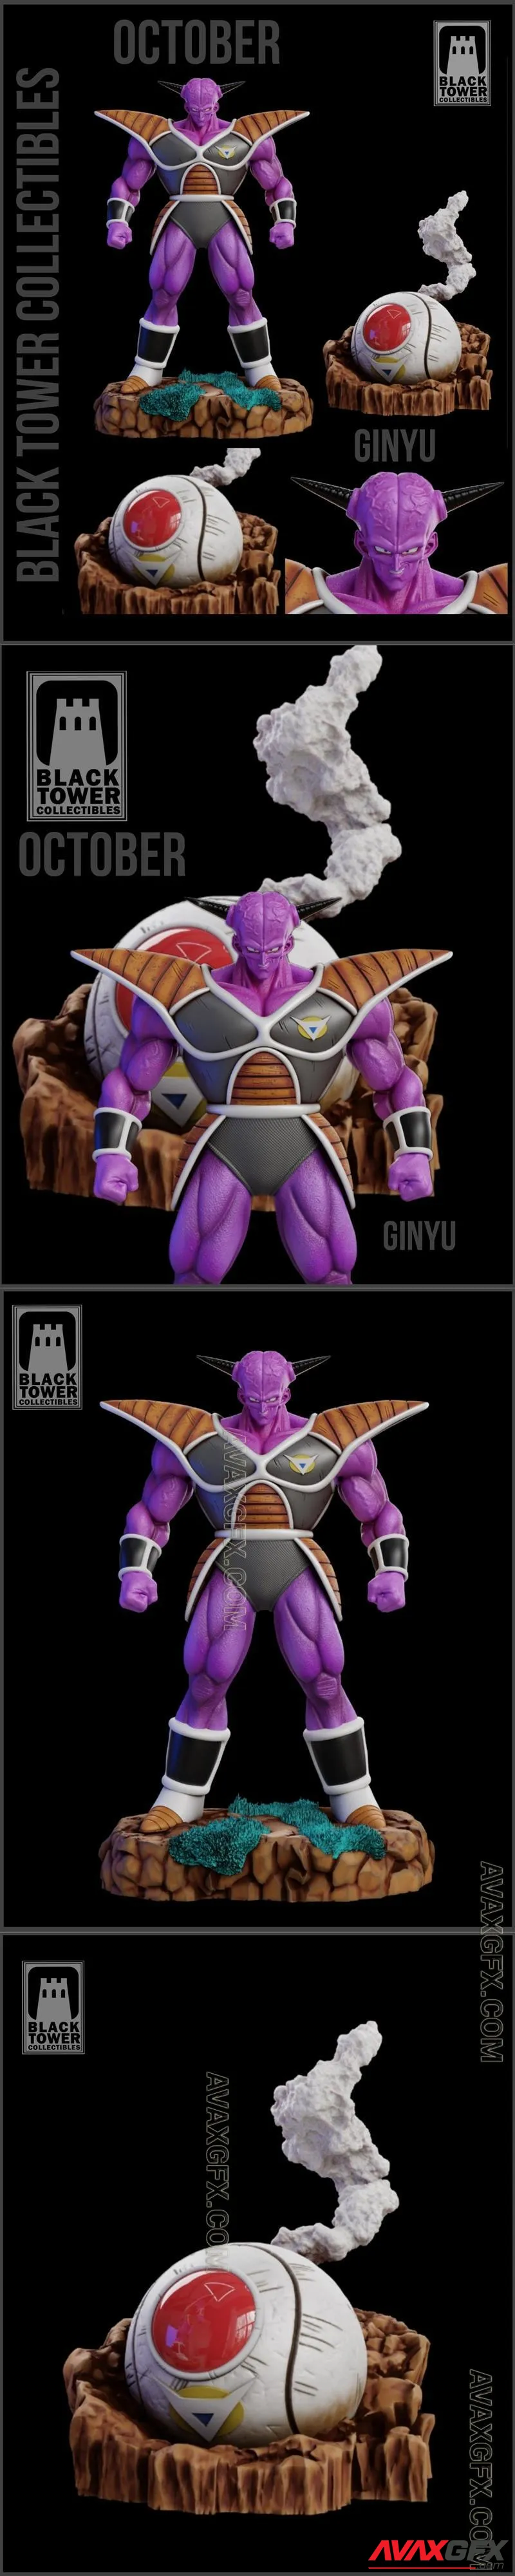 Black Tower Collectibles - Ginyu - STL 3D Model